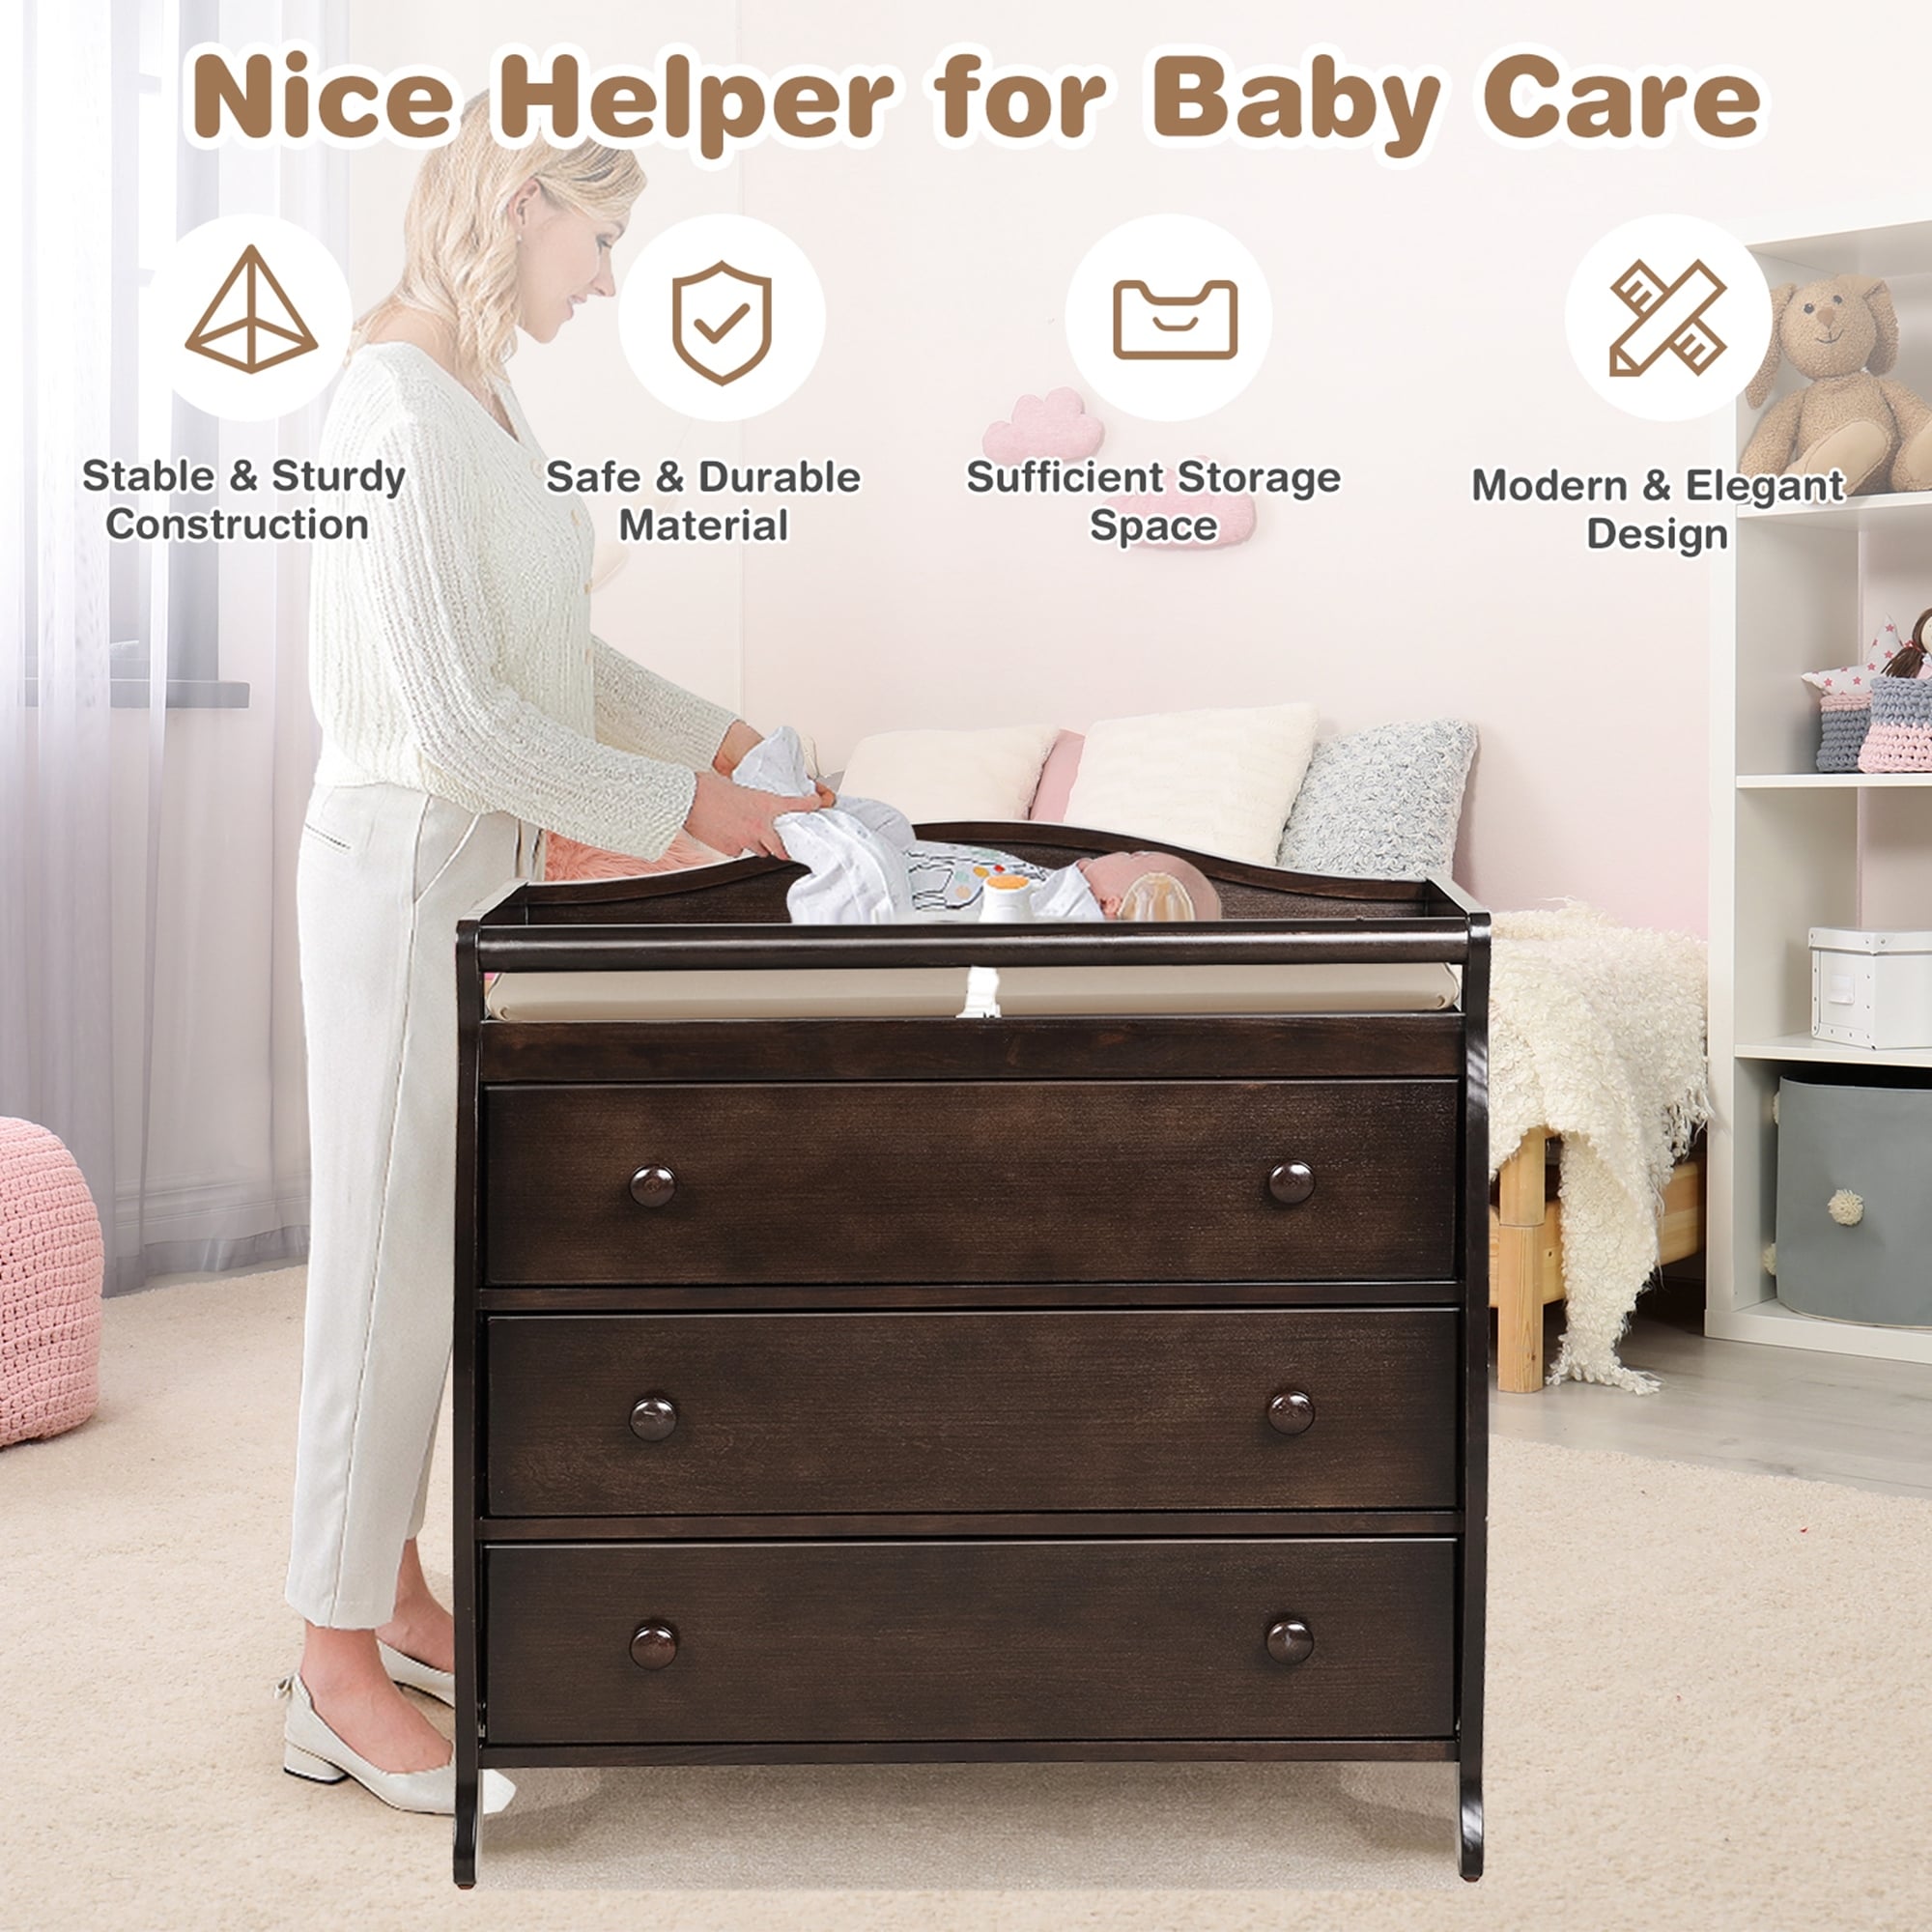 https://ak1.ostkcdn.com/images/products/is/images/direct/d6baadd718a9aff14a801bd338395295241fec30/Costway-3-Drawer-Baby-Changing-Table-Infant-Diaper-Changing-Station-w-.jpg